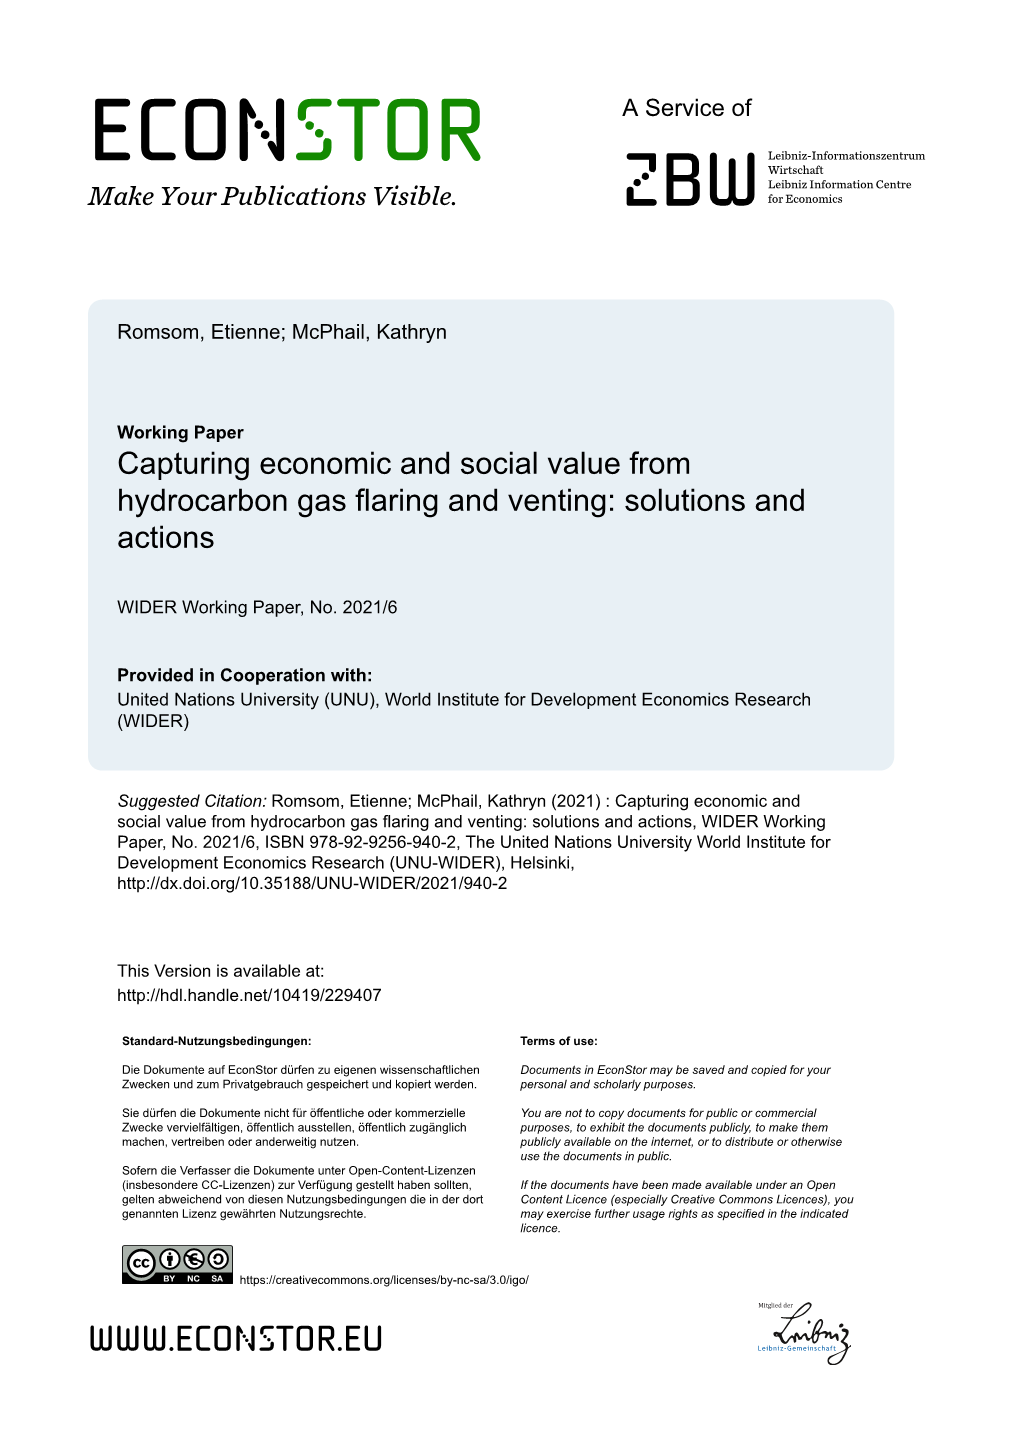 WIDER Working Paper 2021/6-Capturing Economic And